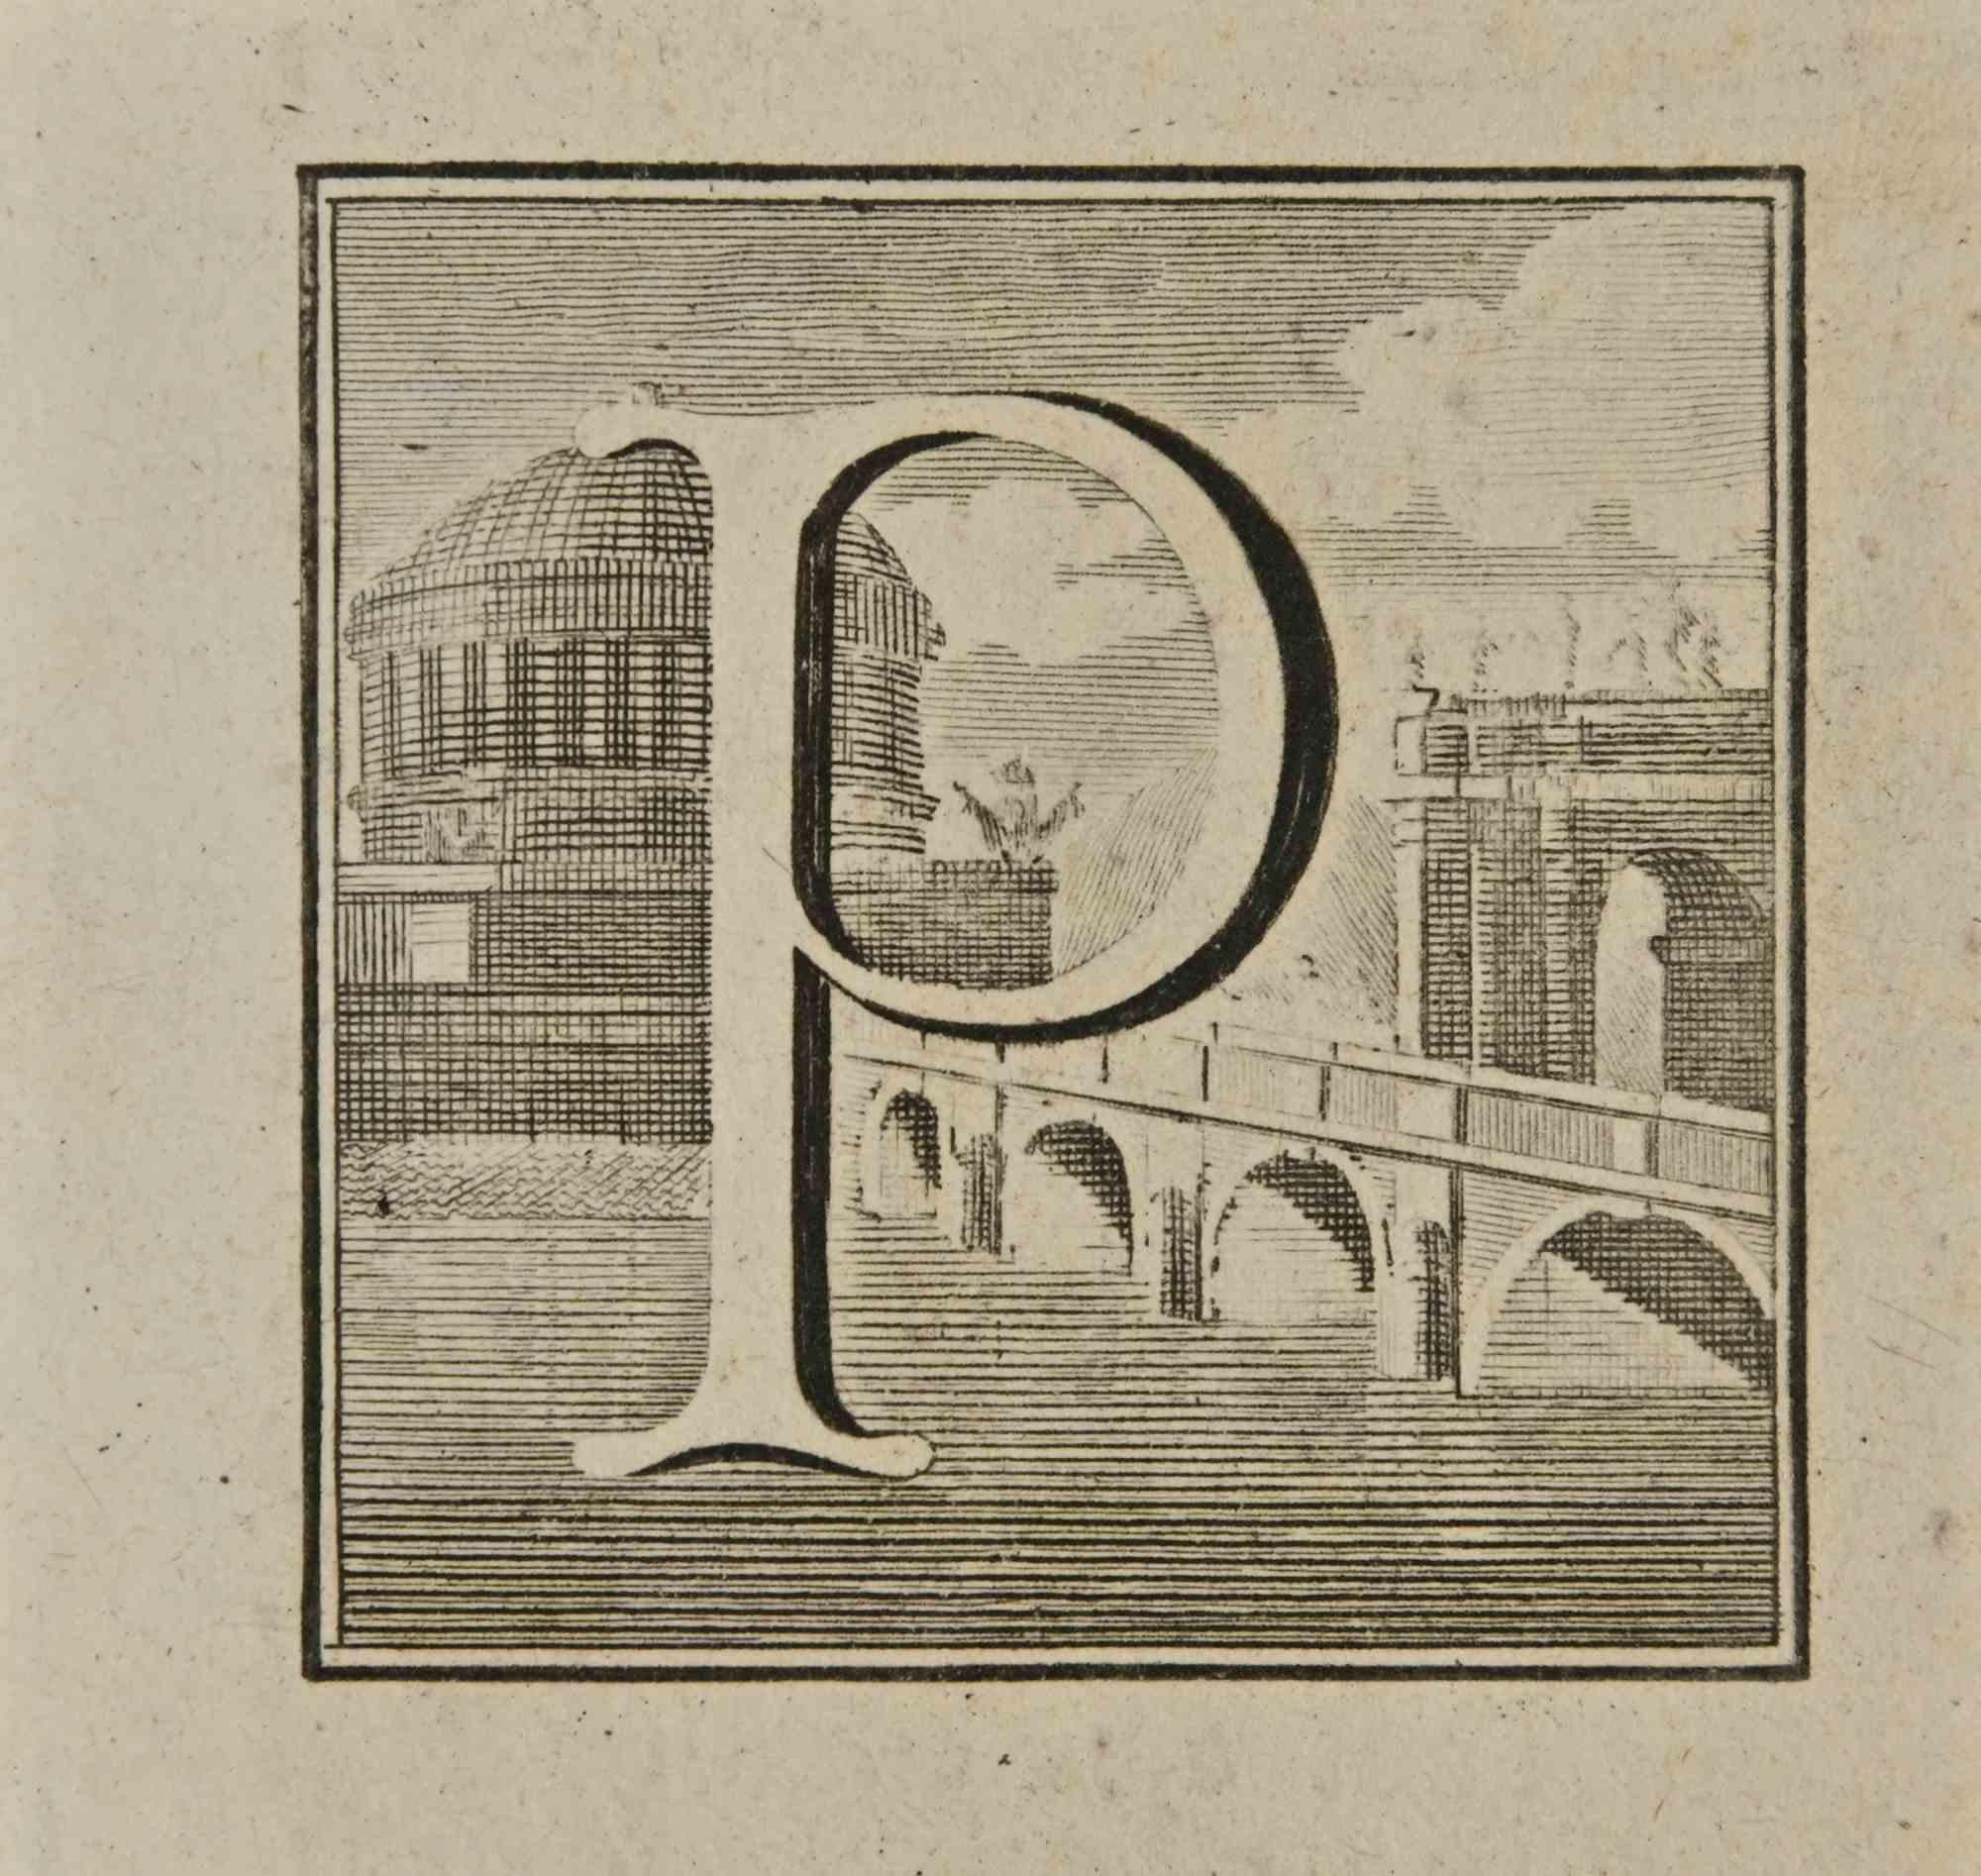 Letter of the Alphabet P,  from the series "Antiquities of Herculaneum", is an etching on paper realized by Luigi Vanvitelli in the 18th century.

Good conditions.

The etching belongs to the print suite “Antiquities of Herculaneum Exposed”